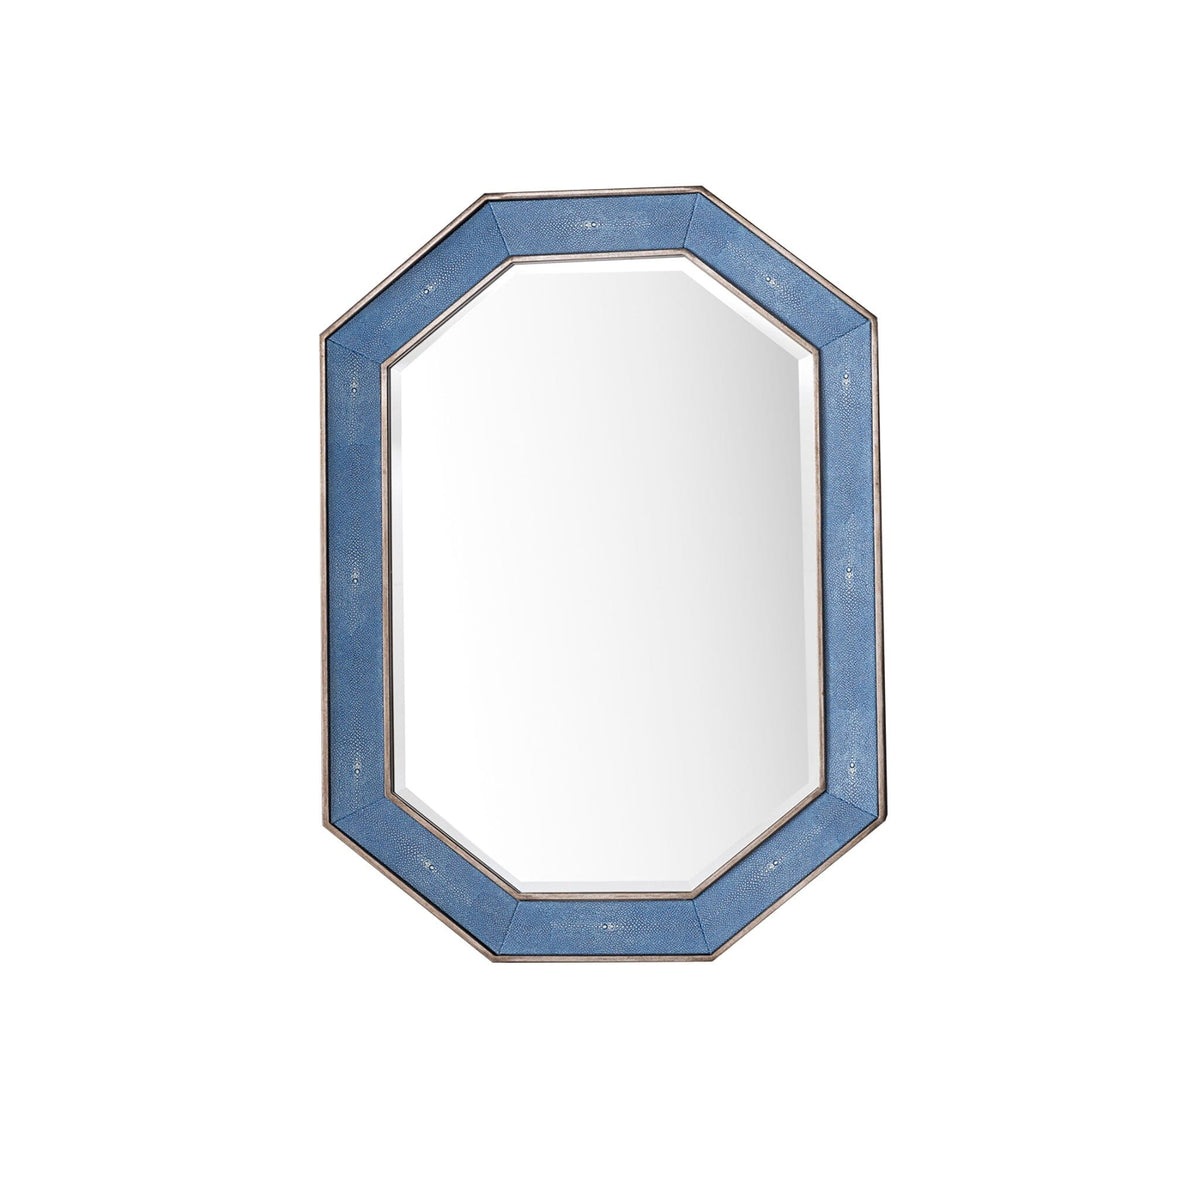 30" Tangent Mirror, Silver with Delft Blue